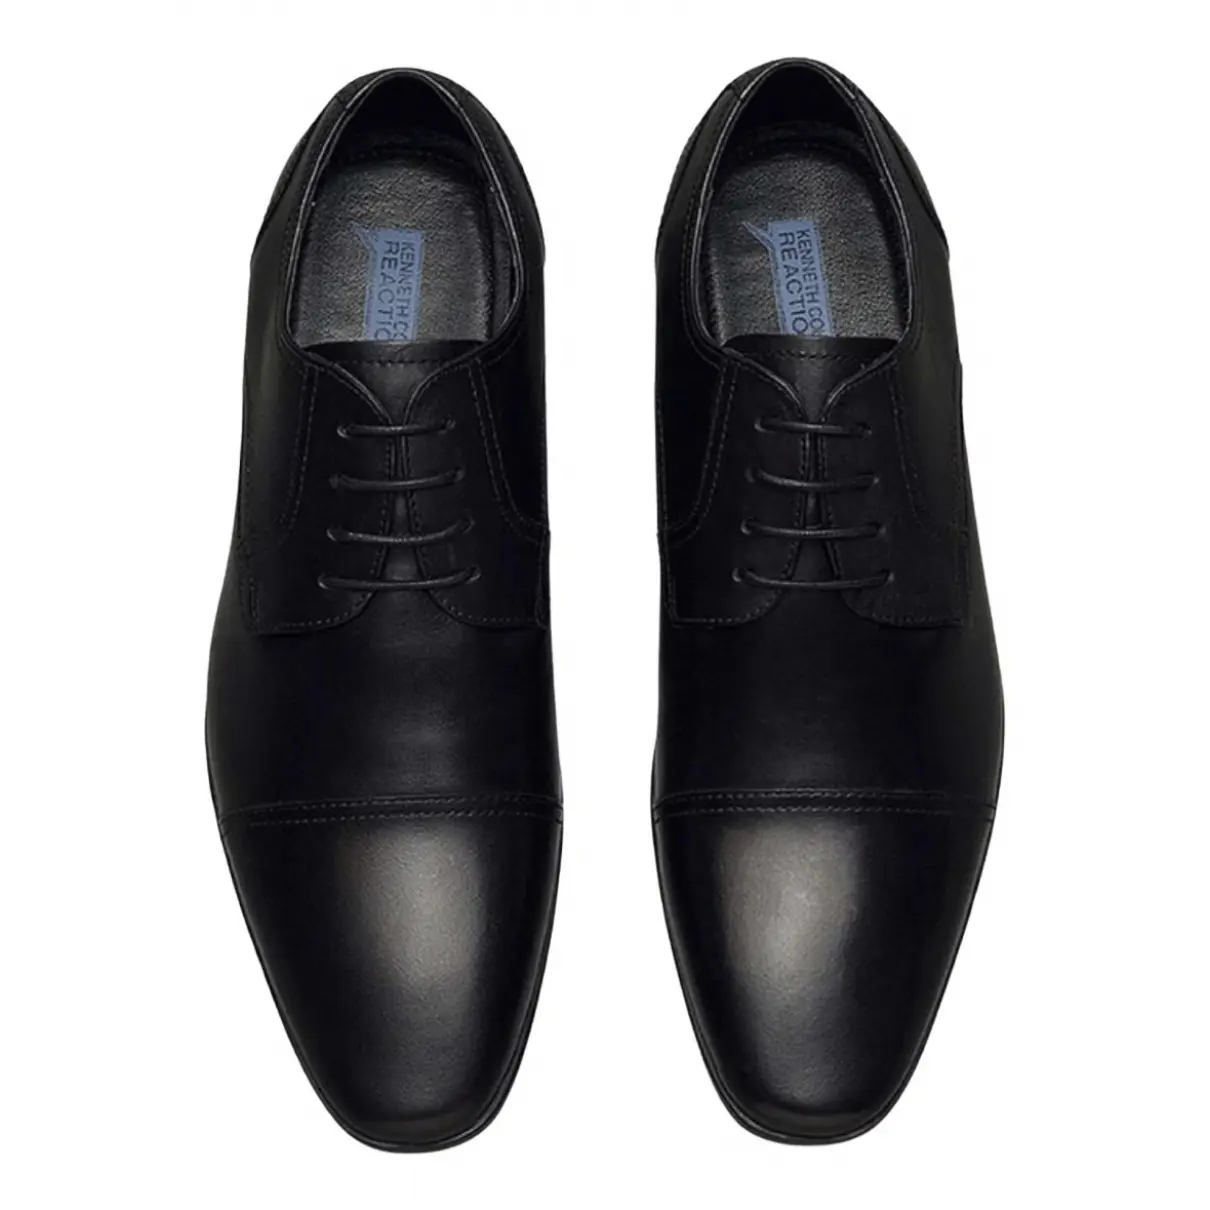 Leather lace ups Kenneth Cole